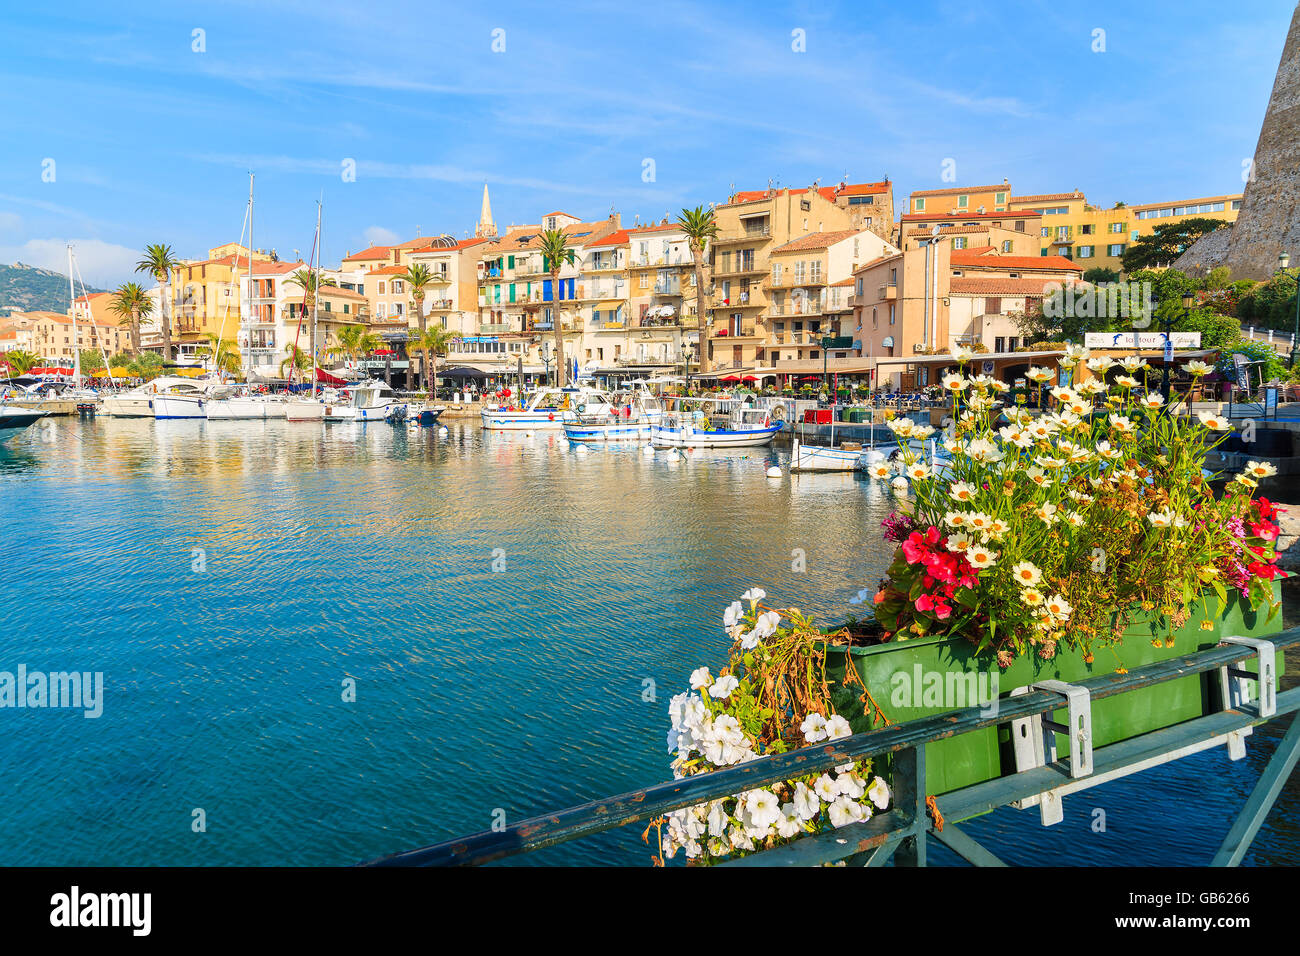 CALVI, CORSICA ISLAND - JUN 29, 2015: flowers in foreground with view of Calvi port with colorful houses in background. This tow Stock Photo